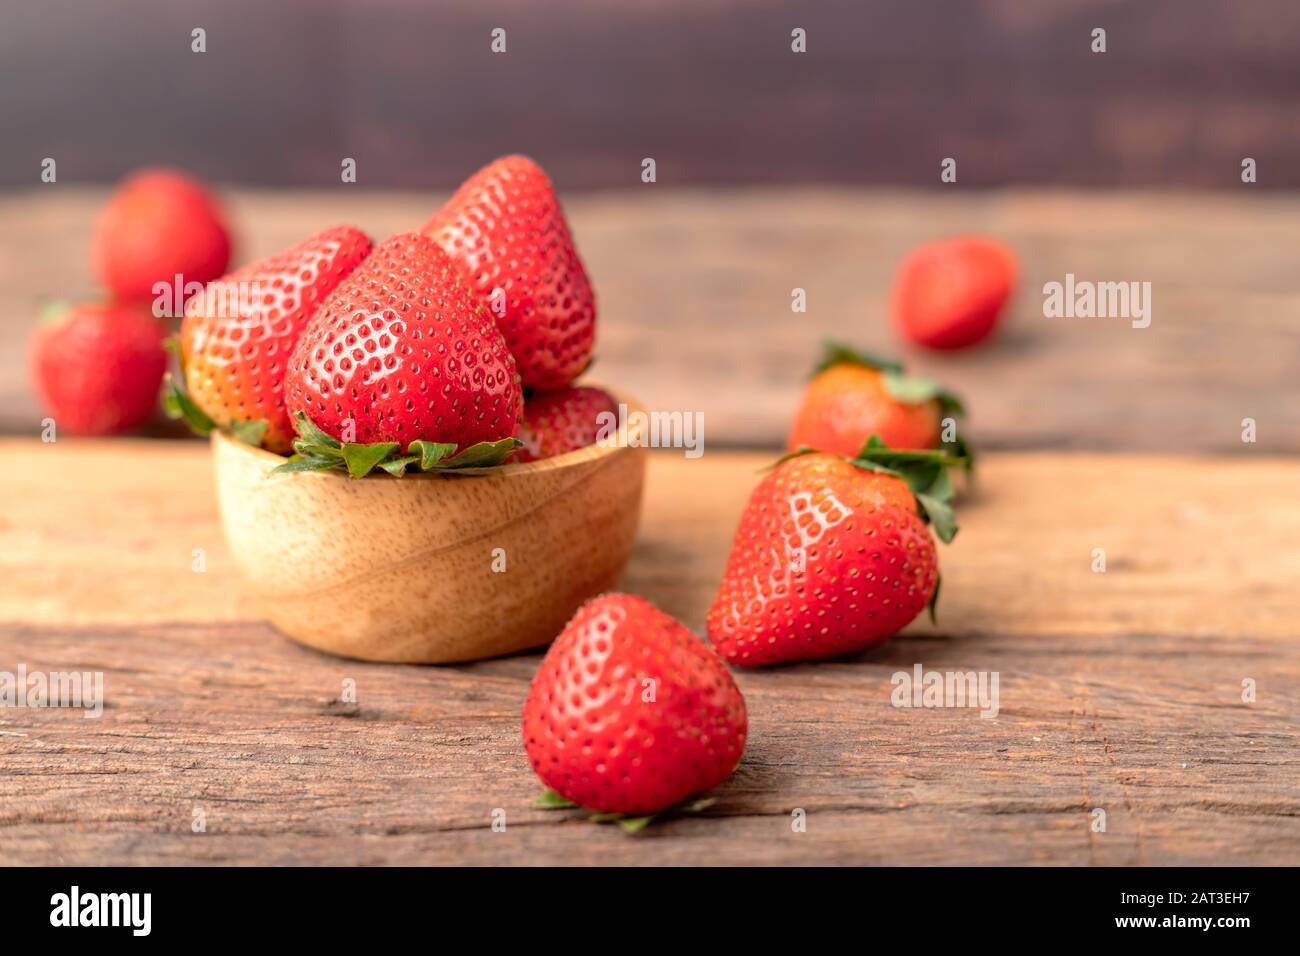 Freshness ripe strawberries are in a wooden bowl placed on the table. Stock Photo